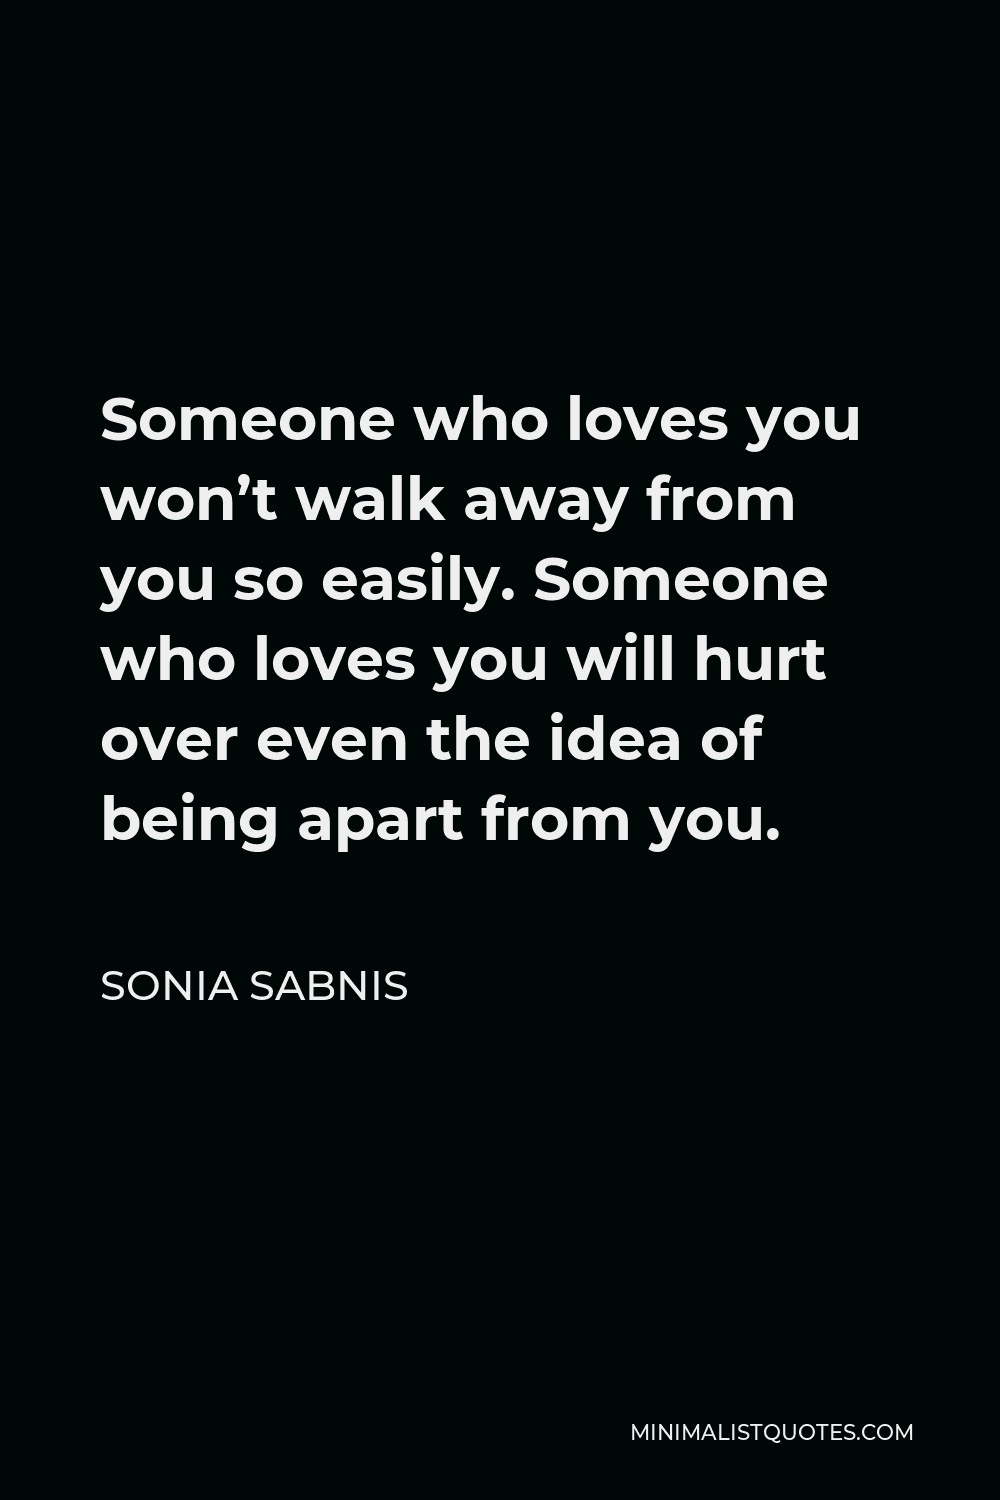 Sonia Sabnis Quote - Someone who loves you won’t walk away from you so easily. Someone who loves you will hurt over even the idea of being apart from you.